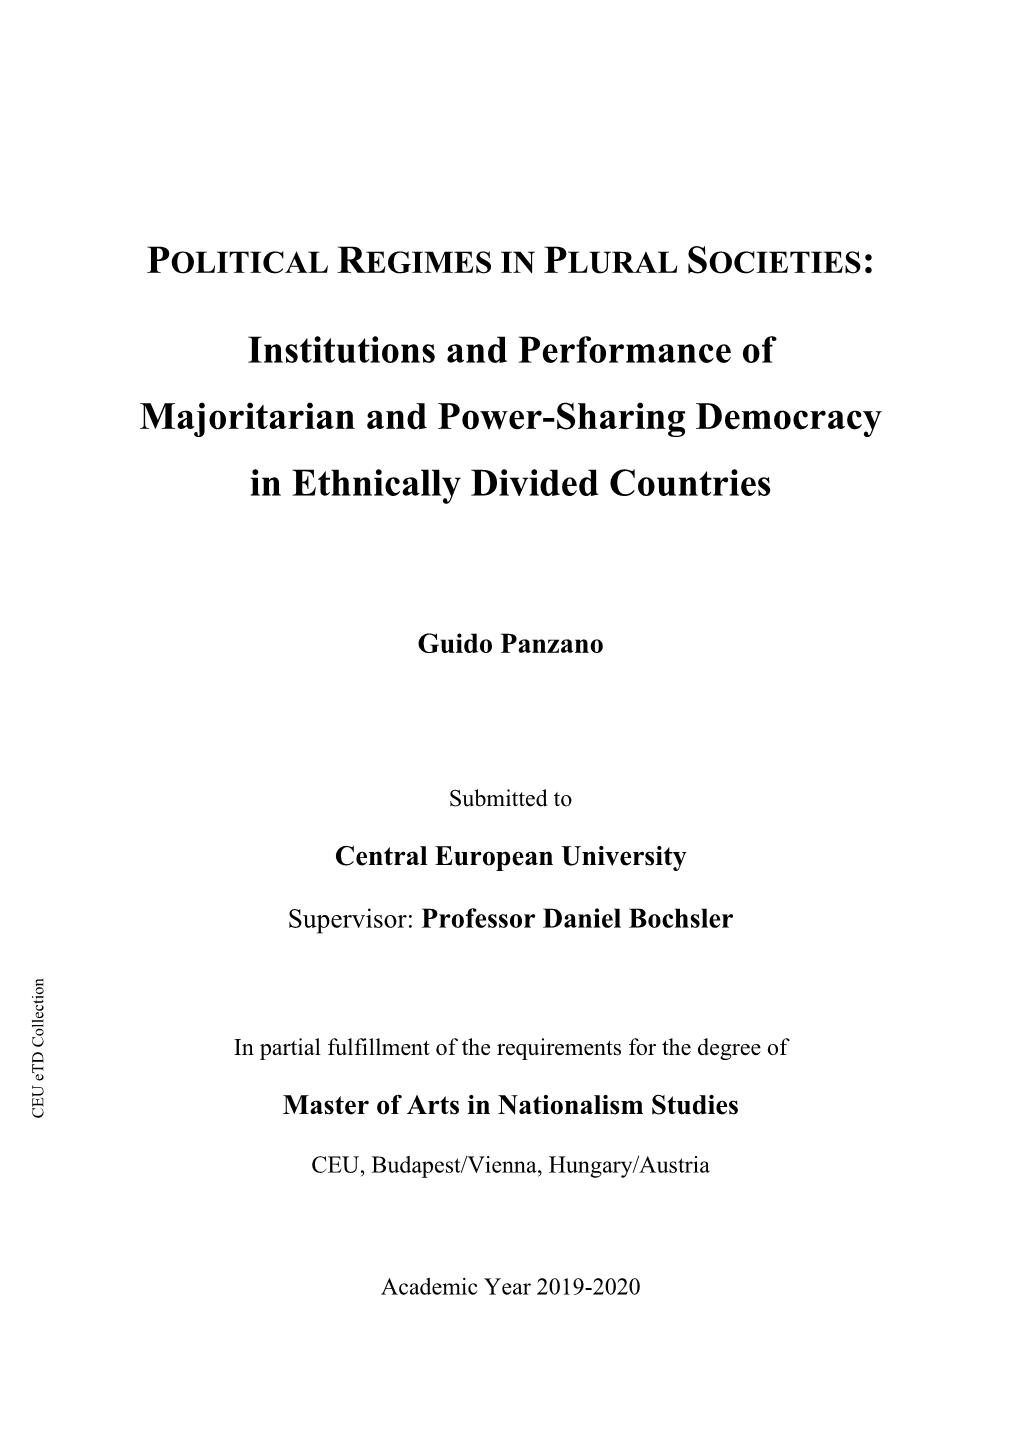 Institutions and Performance of Majoritarian and Power-Sharing Democracy in Ethnically Divided Countries